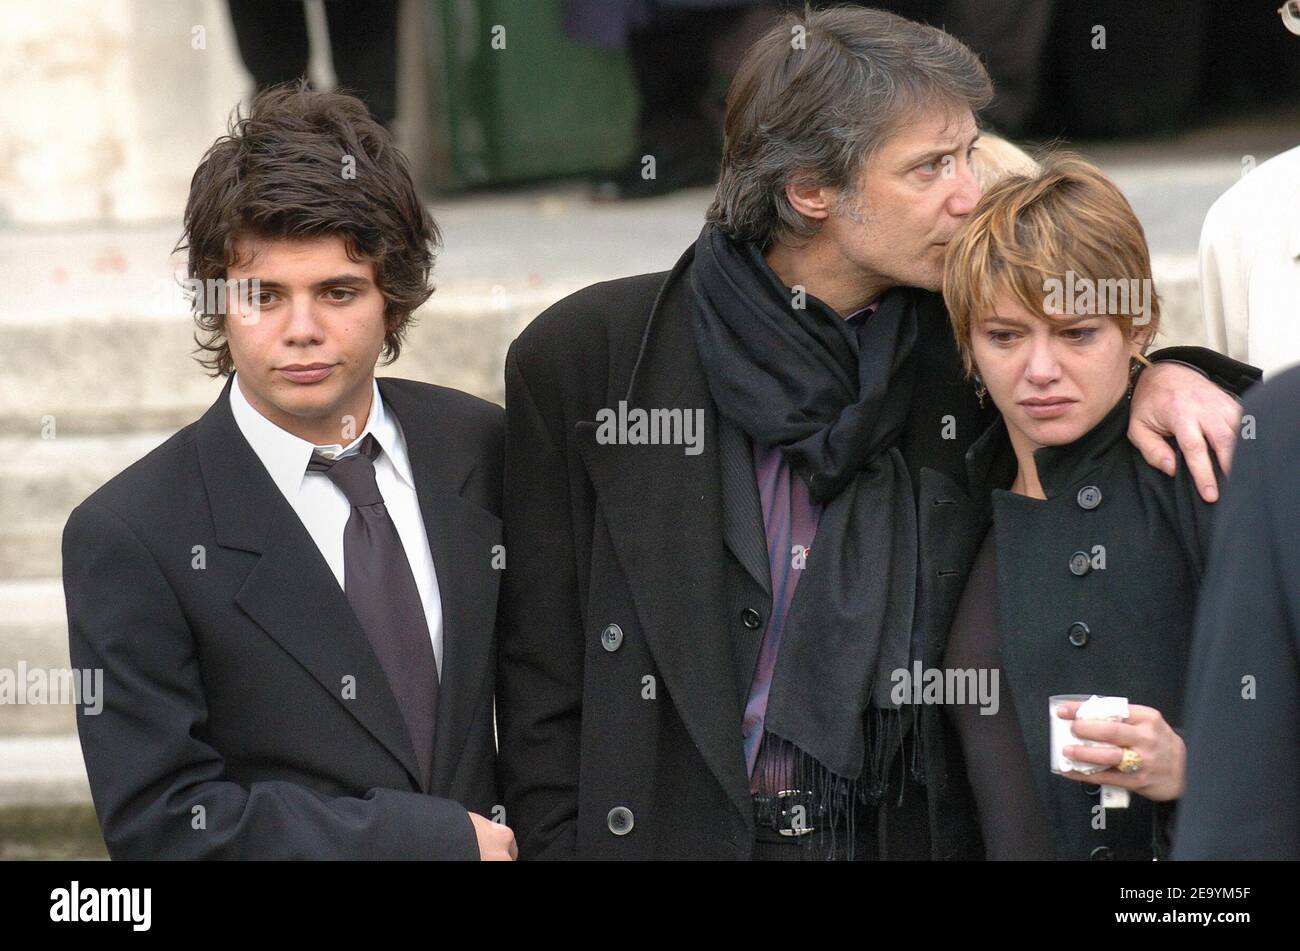 French actor Antoine De Caunes, his son Jeremie and his daughter Emma de Caunes attend the funeral of their mother and grand-Mother, French announcer Jacqueline Joubert (who died aged 83) during a ceremony held at Saint Jean-Baptiste church in Neuilly, France near Paris on january 12, 2005. Photo by Gorassini-Klein/ABACA. Stock Photo